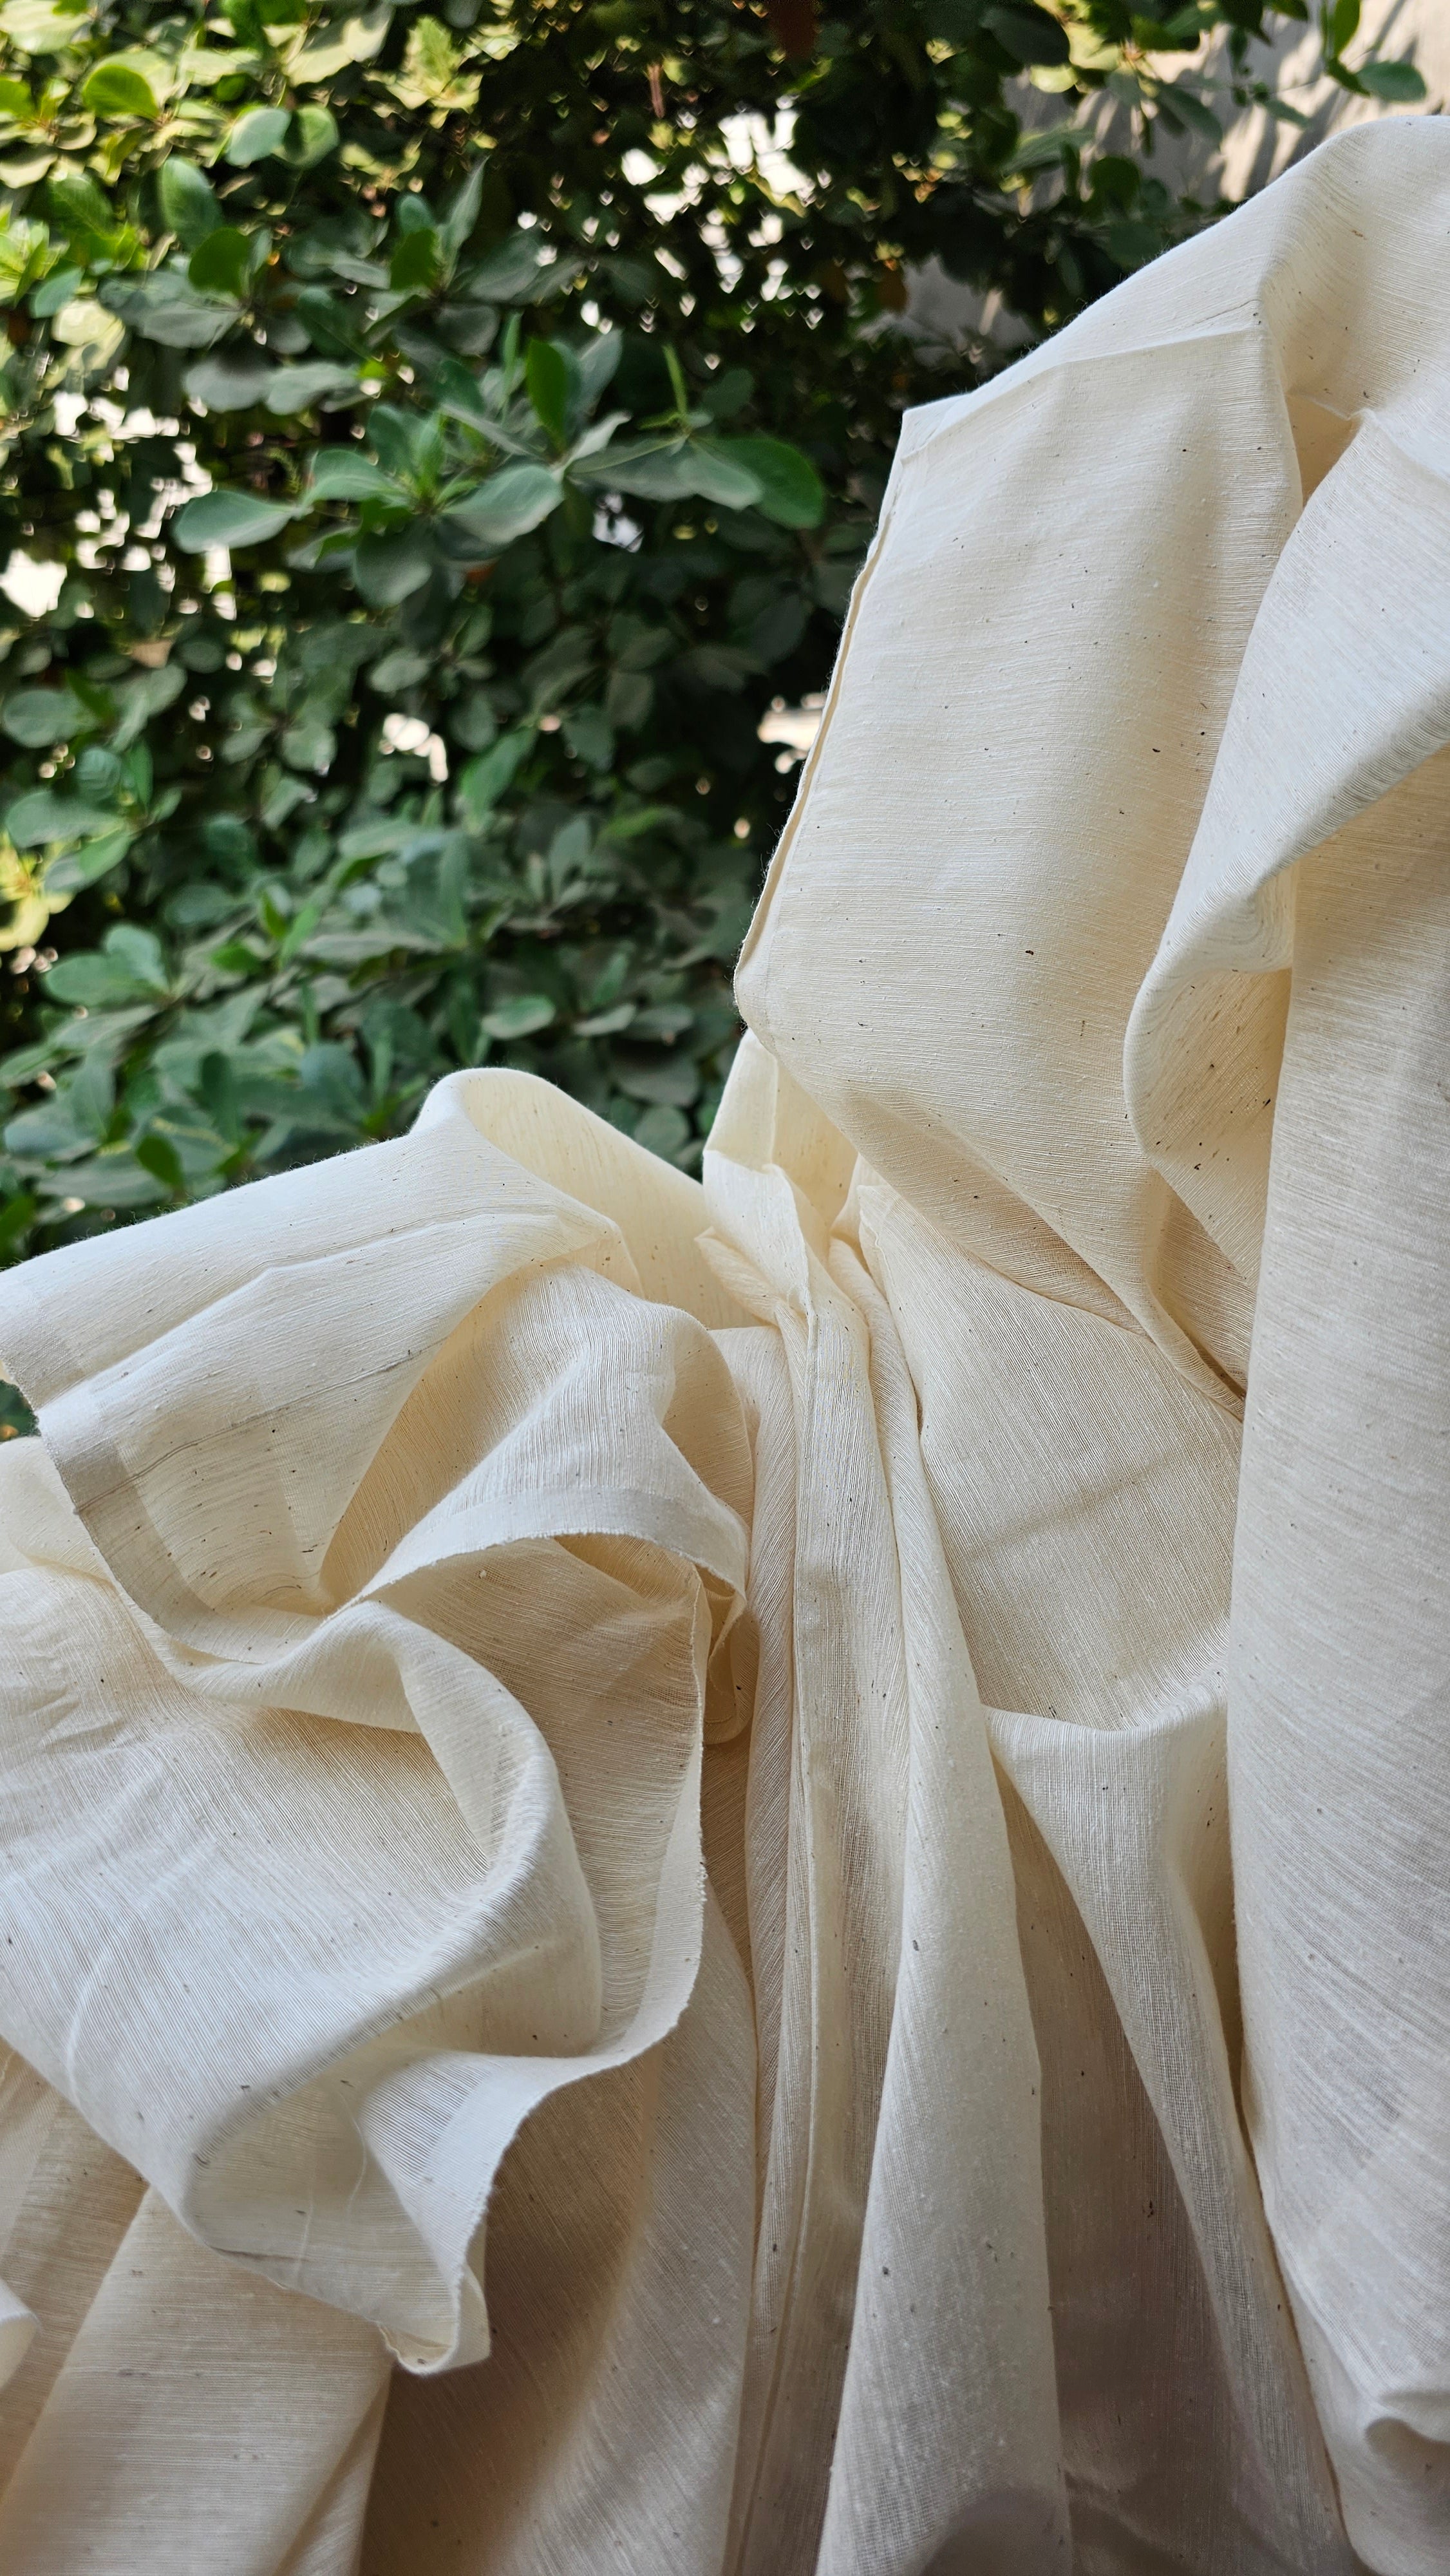 Fabric Enchantment with Handspun Cotton Weft, Handwoven Elegance, and Natural Off-White Splendor